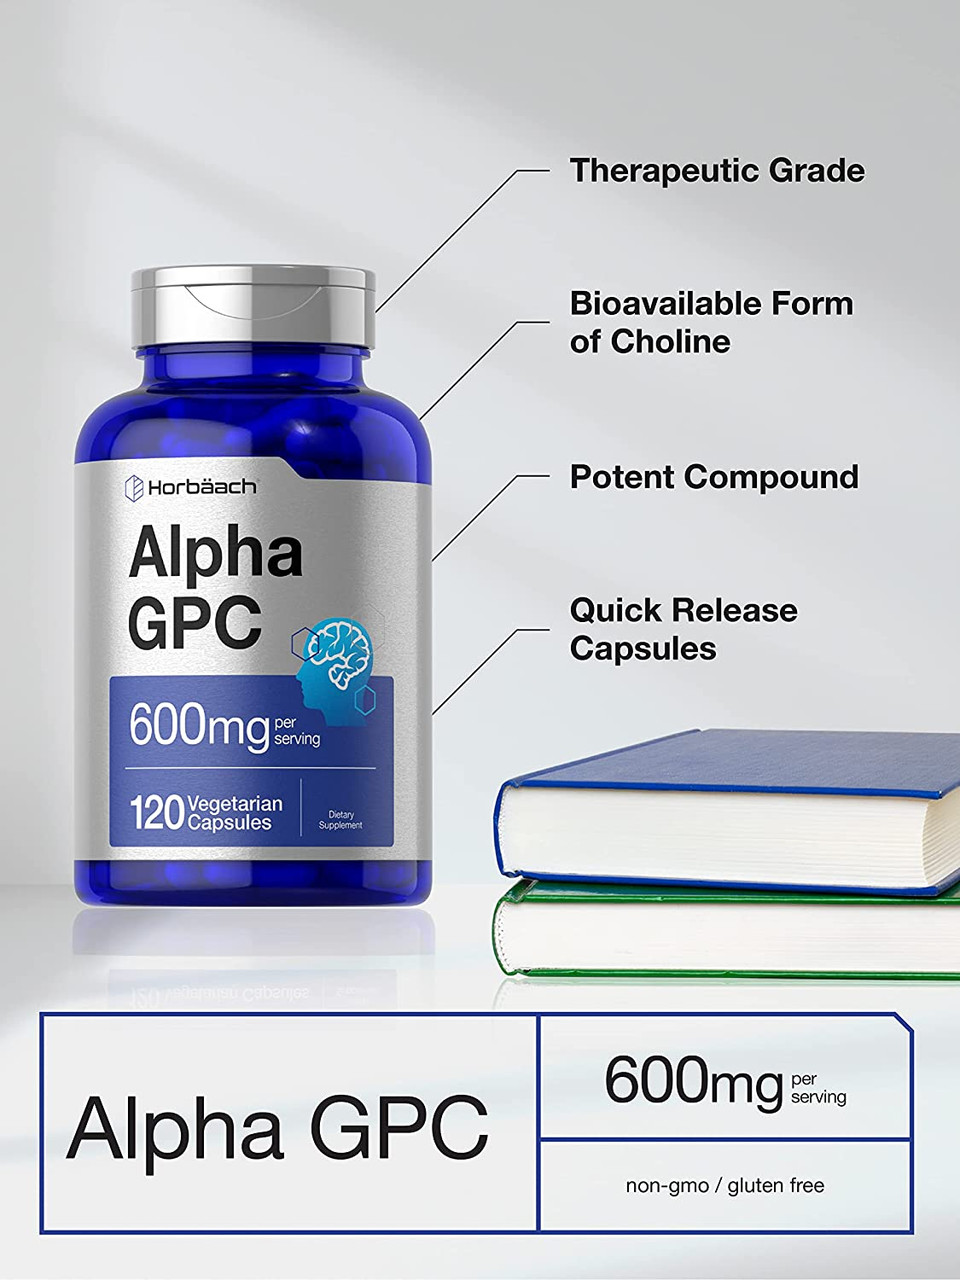 Alpha GPC 600mg | 120 Capsules | Vegetarian, Non-GMO & Gluten Free Choline Supplement | Supports Healthy Memory, Focus and Clarity | by Horbaach